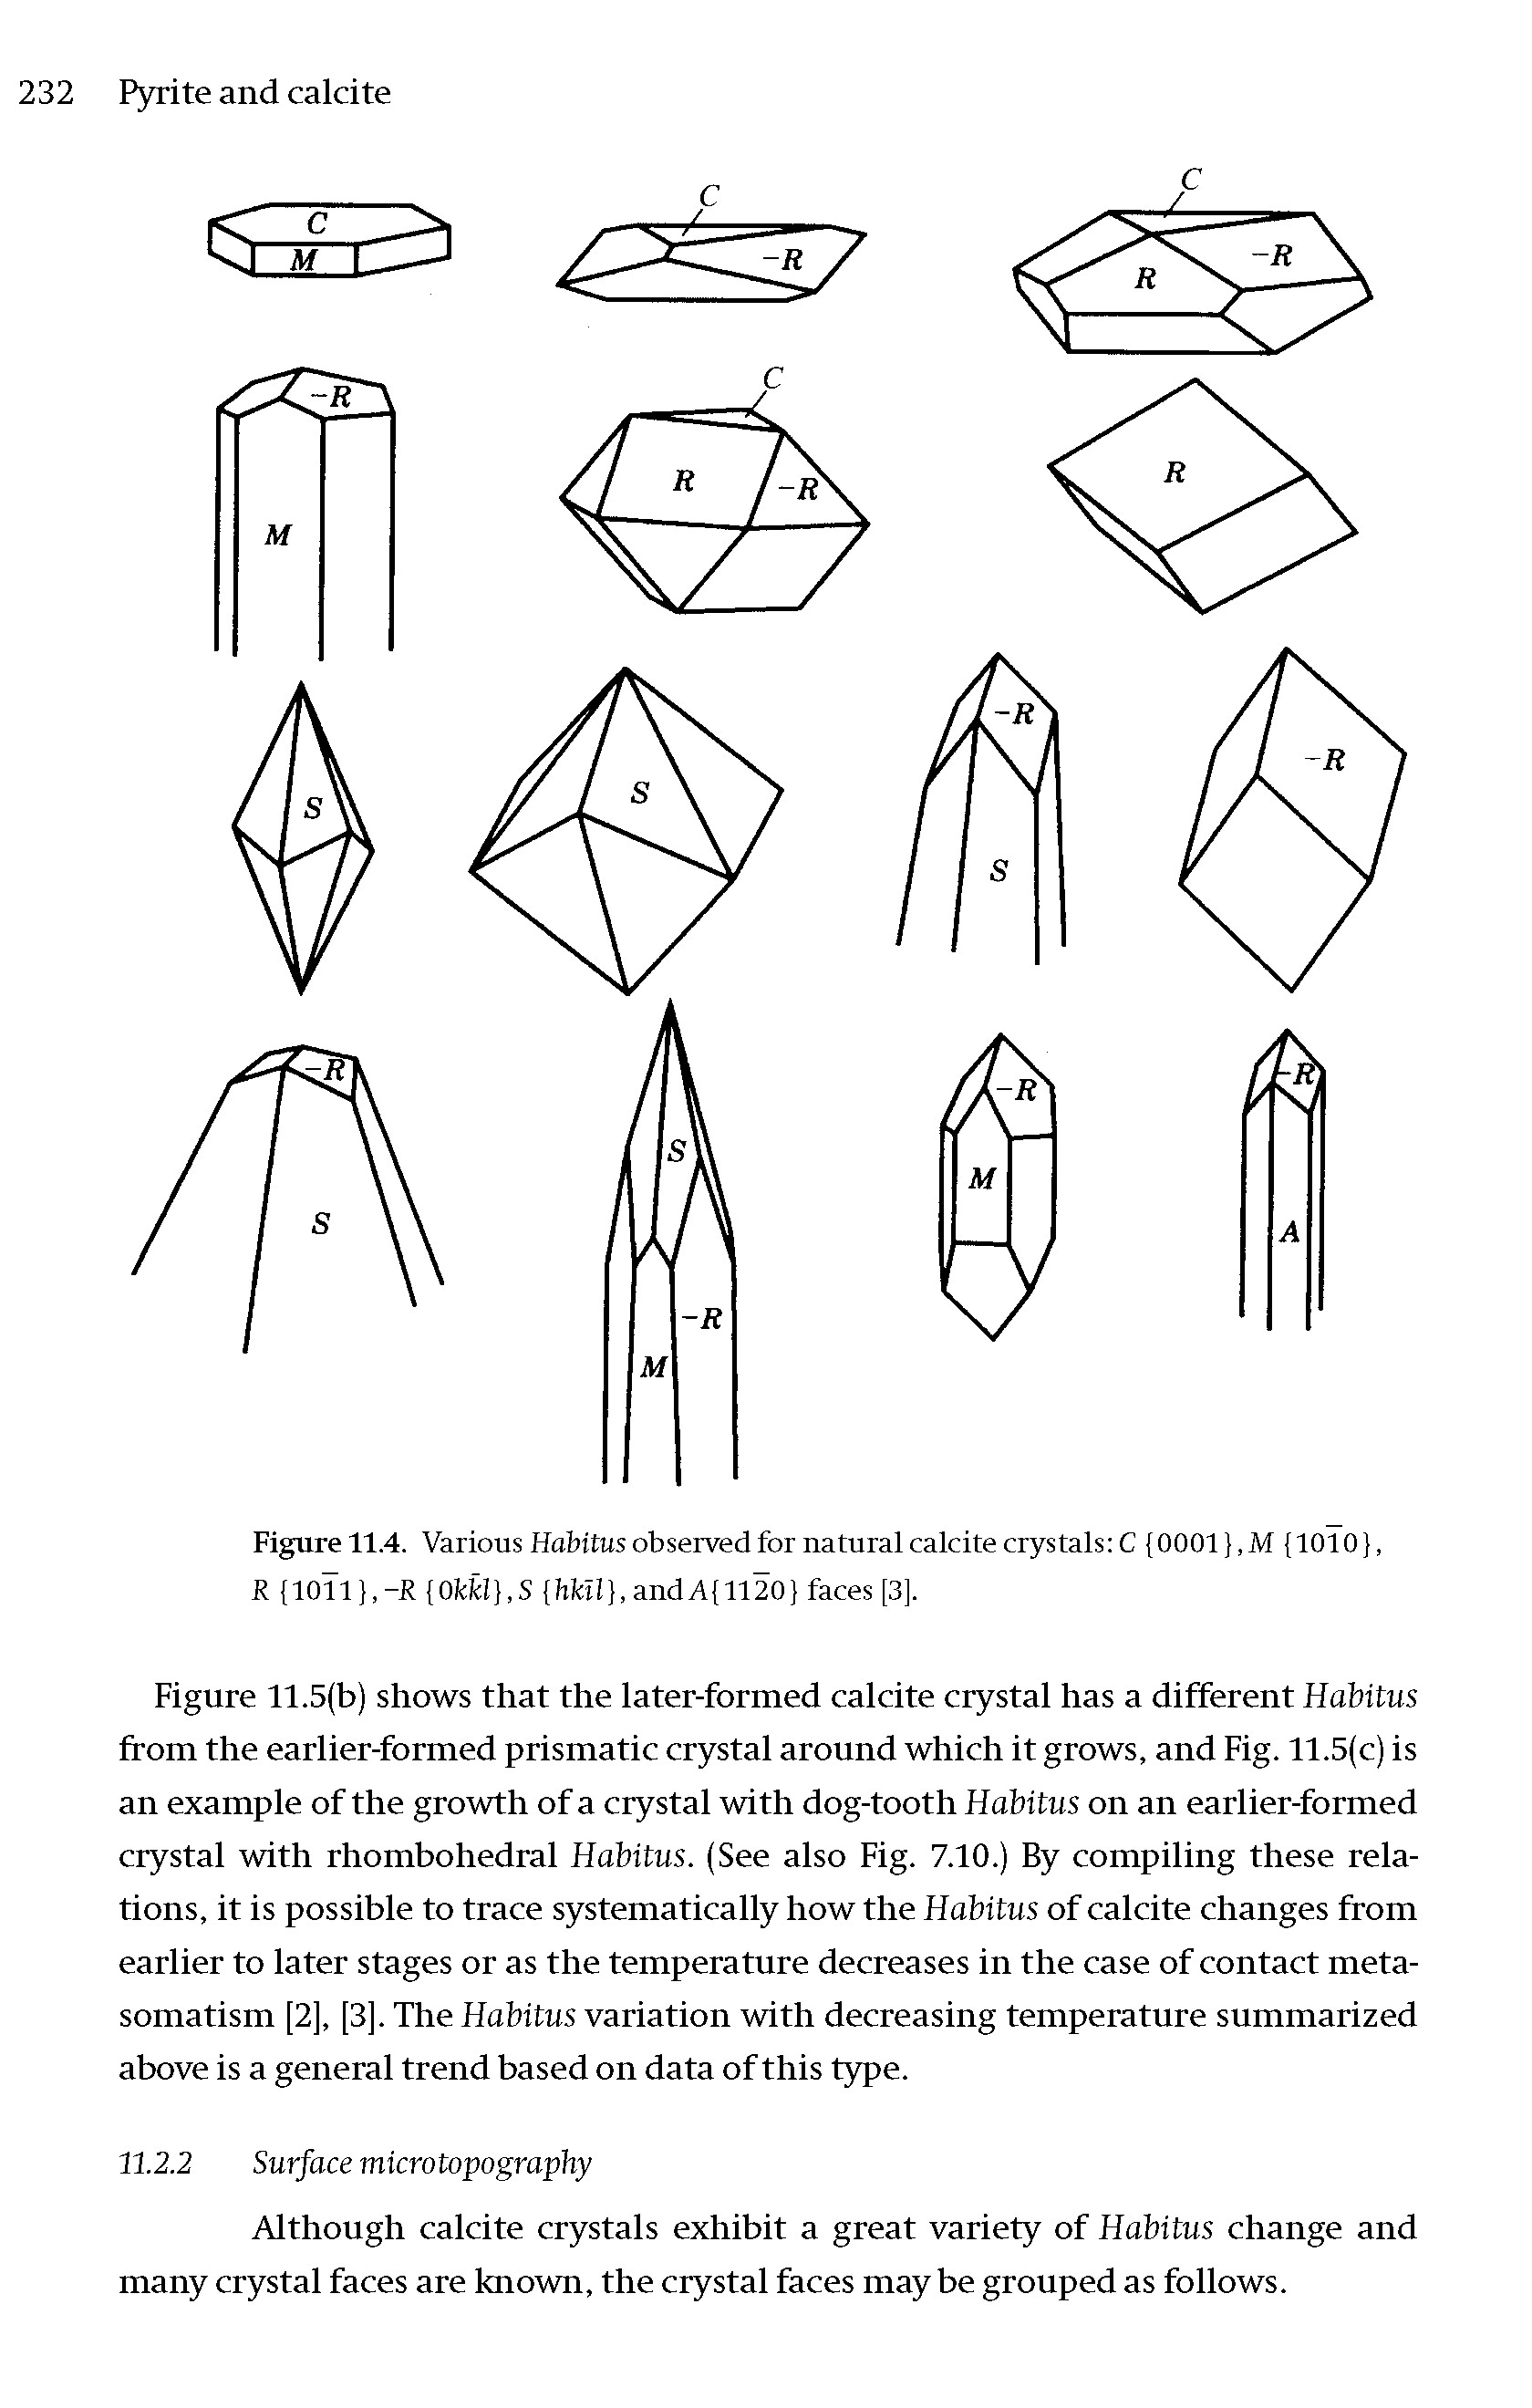 Figure 11.5(b) shows that the later-formed calcite crystal has a different Habitus from the earlier-formed prismatic crystal around which it grows, and Fig. 11.5(c) is an example of the growth of a crystal with dog-tooth Habitus on an earlier-formed crystal with rhombohedral Habitus. (See also Fig. 7.10.) By compiling these relations, it is possible to trace systematically how the Habitus of calcite changes from earlier to later stages or as the temperature decreases in the case of contact metasomatism [2], [3]. The Habitus variation with decreasing temperature summarized above is a general trend based on data of this type.